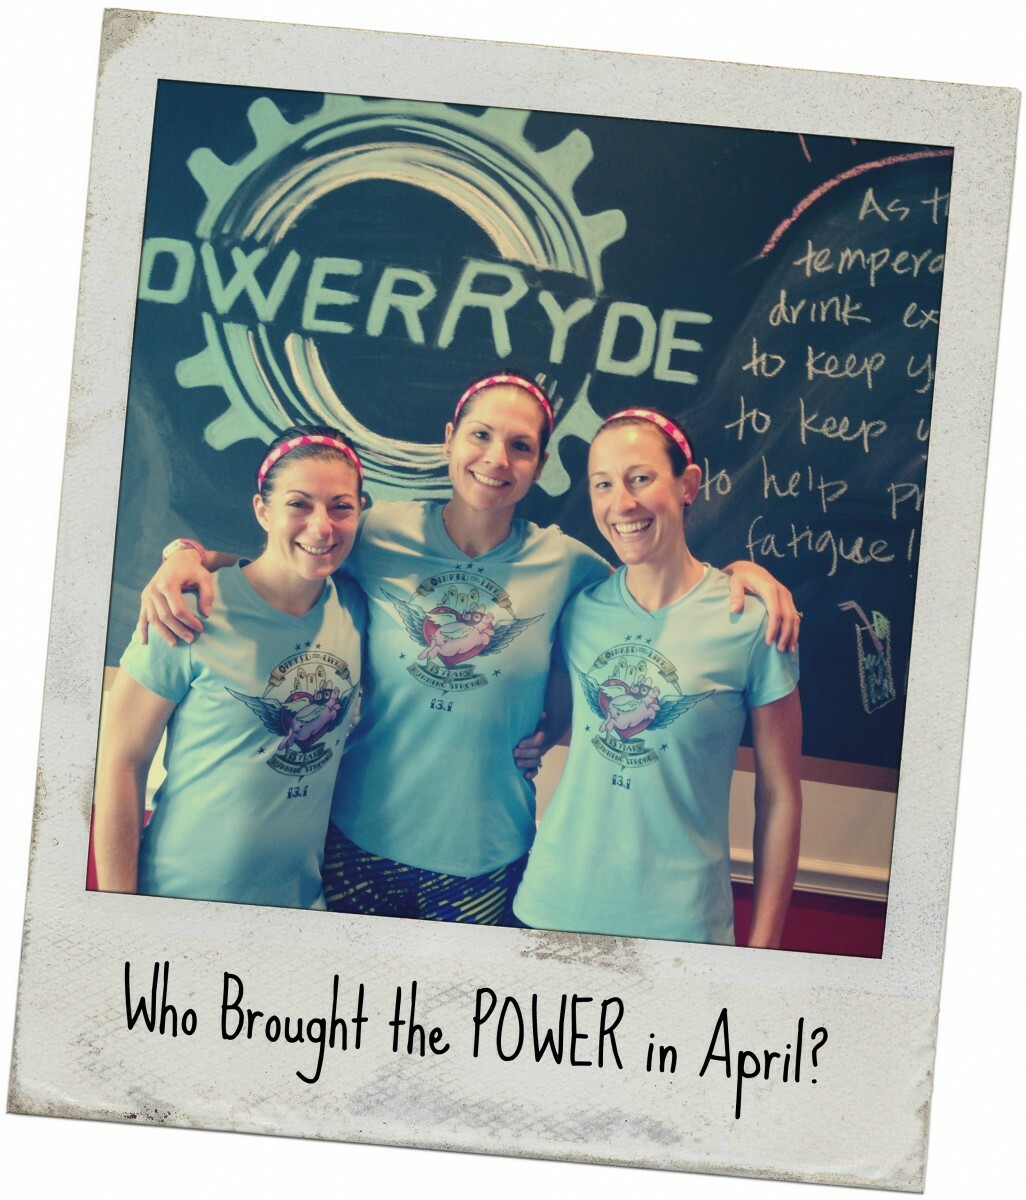 Polaroid style picture of Amy Reiss, Julia Gibson and Kelly Cappelletty with 'Who Brought the POWER in 'April'?